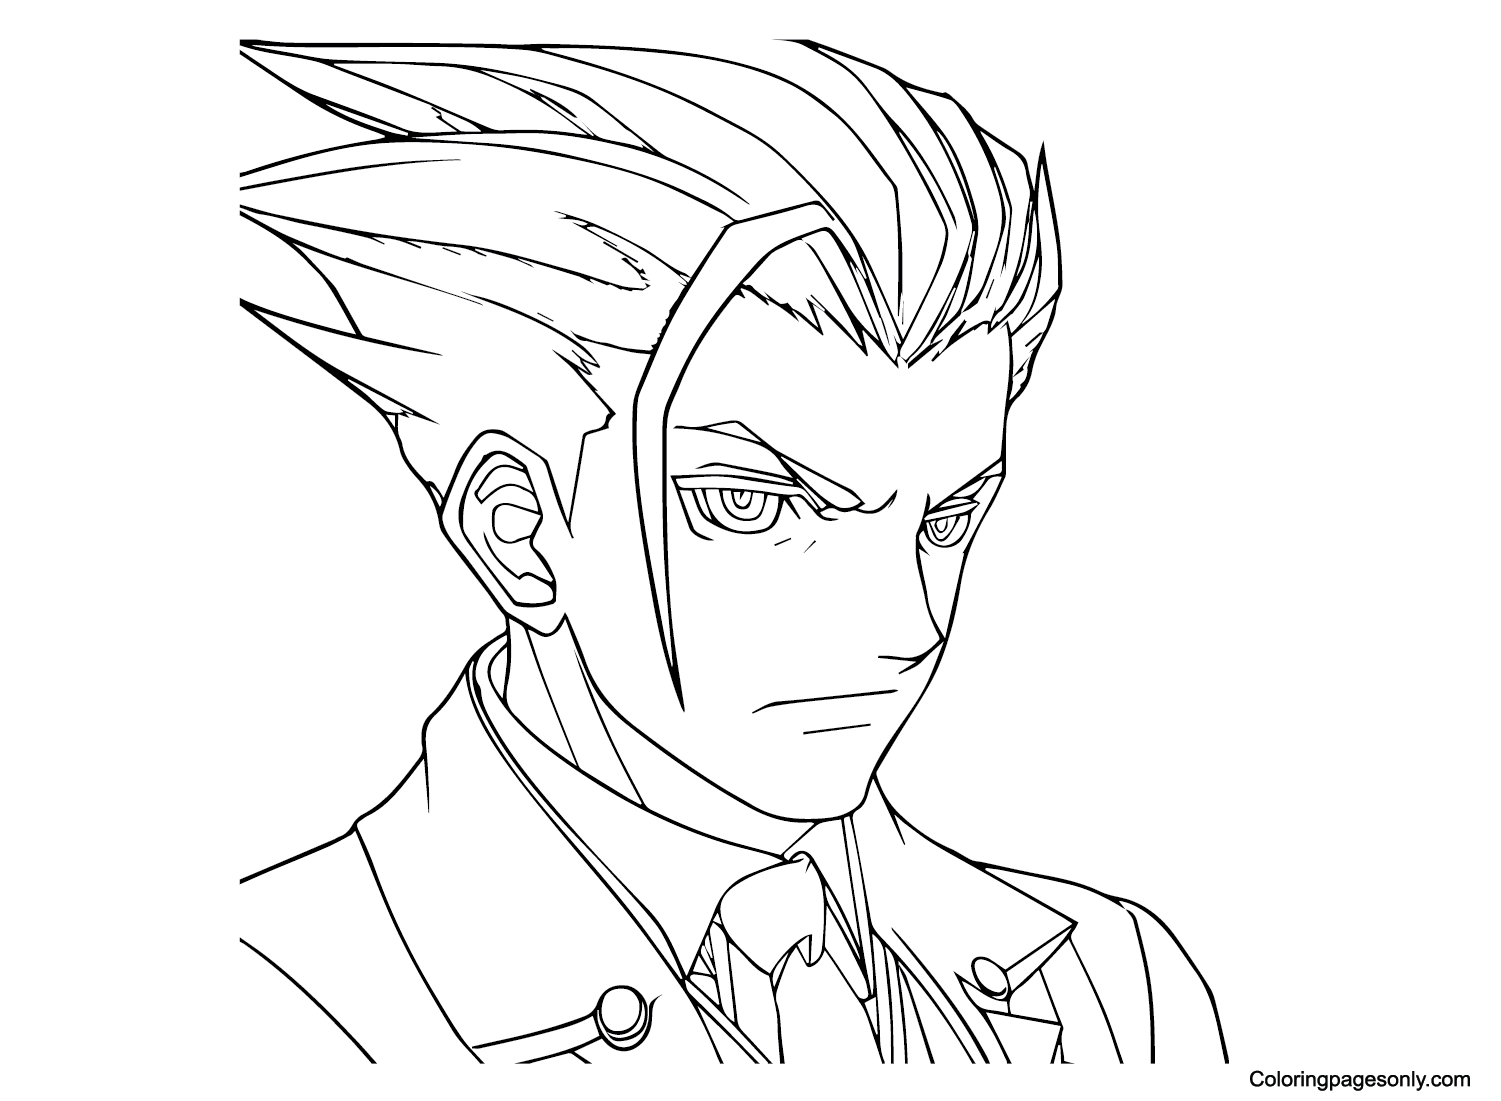 Phoenix Wright Ace Attorney Coloring Page